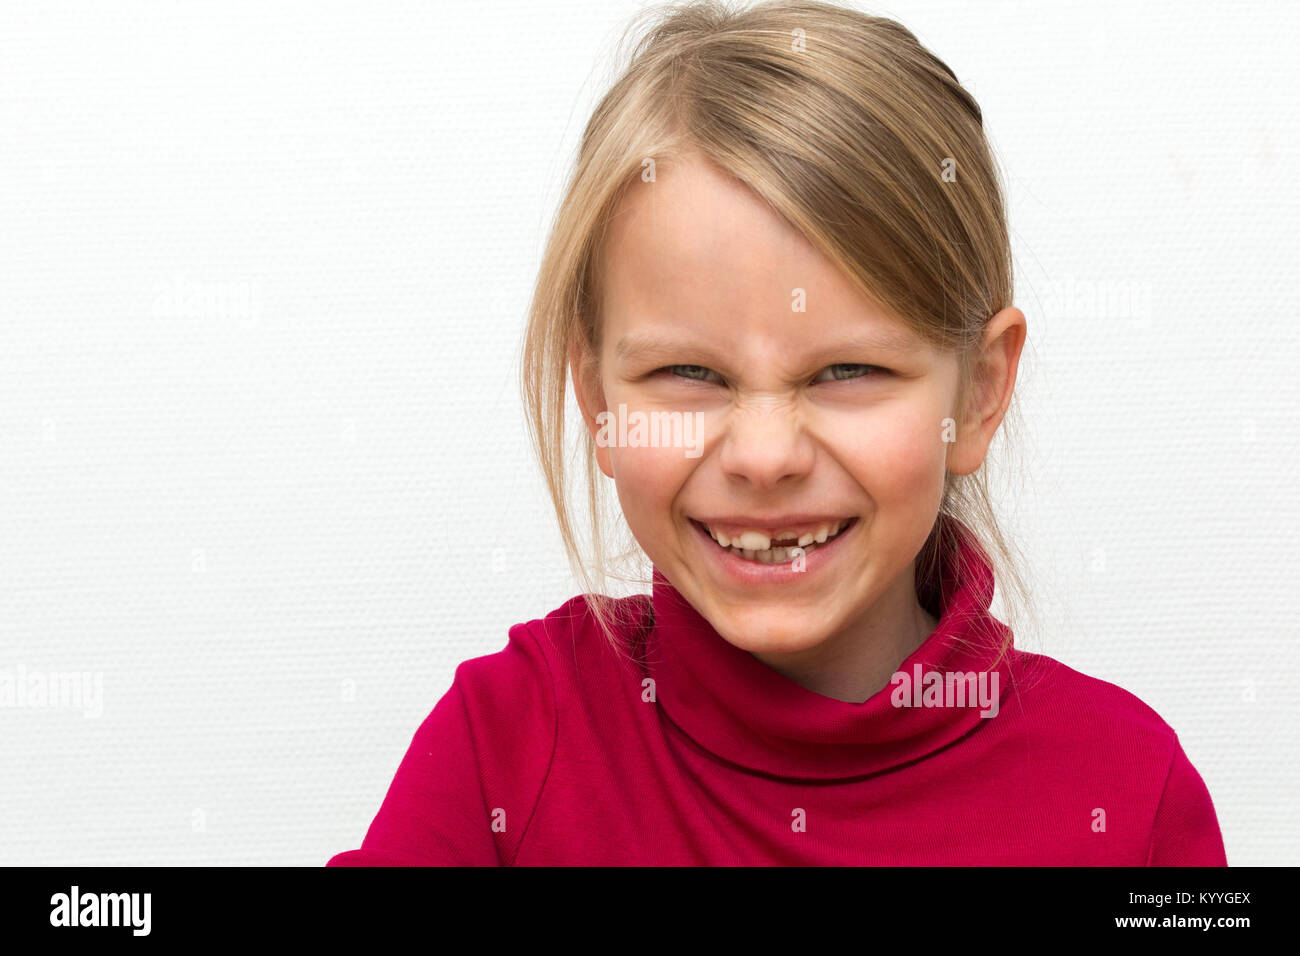 Portrait of a 6 years old blond girl. It wears a red turtleneck and has a beaming laugh Stock Photo